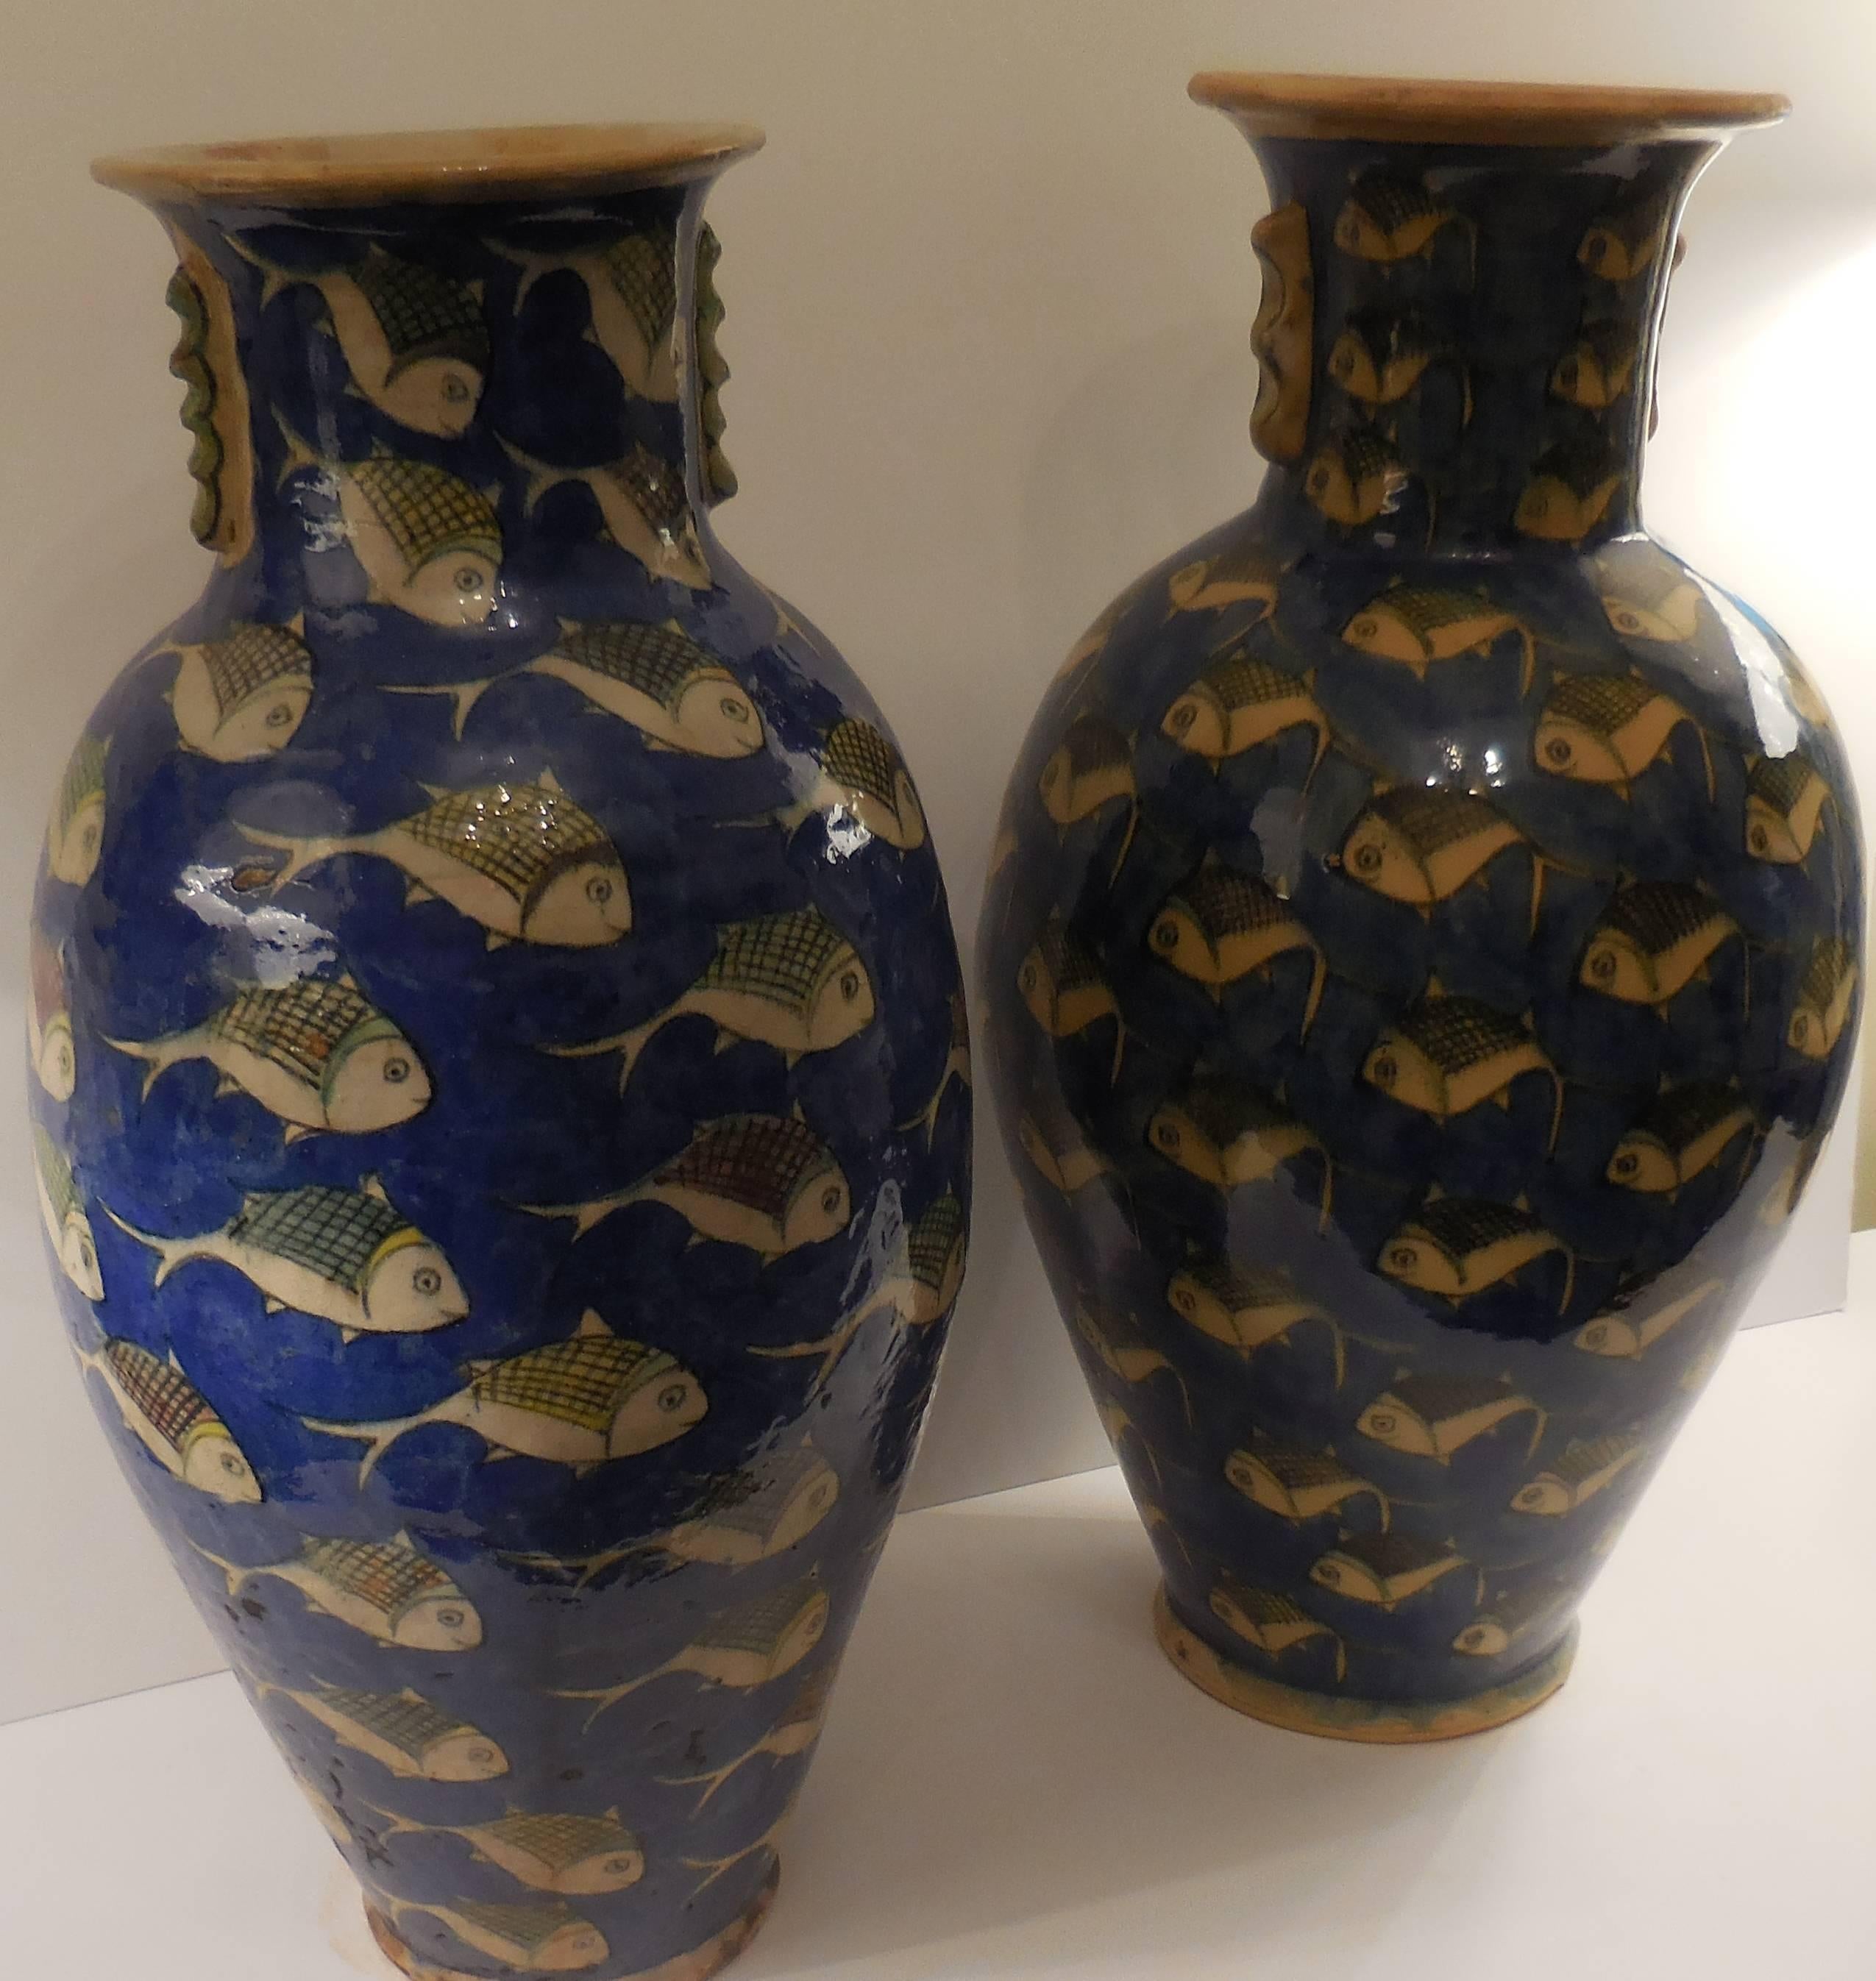 Fantastic one of a kind ceramic vases, hand-painted all around with fish motif.
On a blue backgrownd.

Size 
1. 22